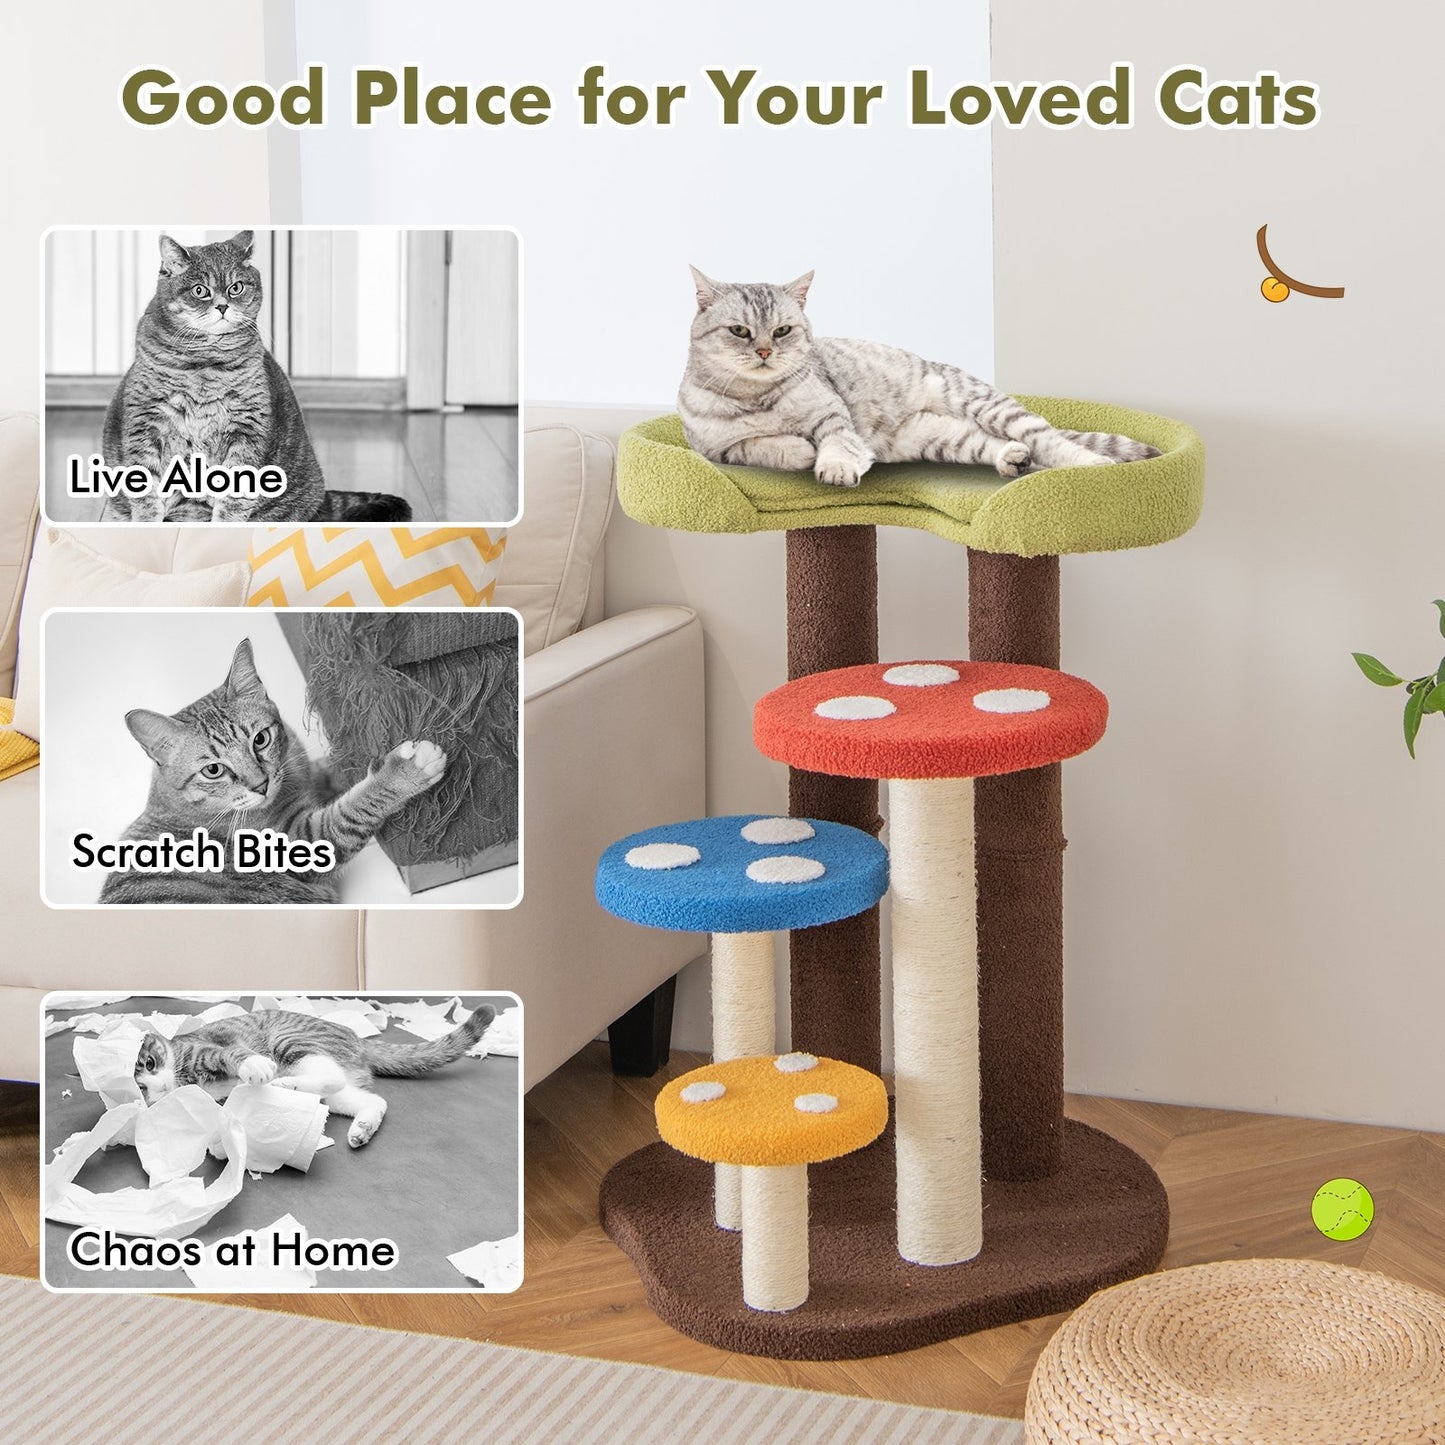 3-In-1 Cat Tree 3 Full-Wrapped Sisal Posts Removable Mat and Platforms, Multicolor